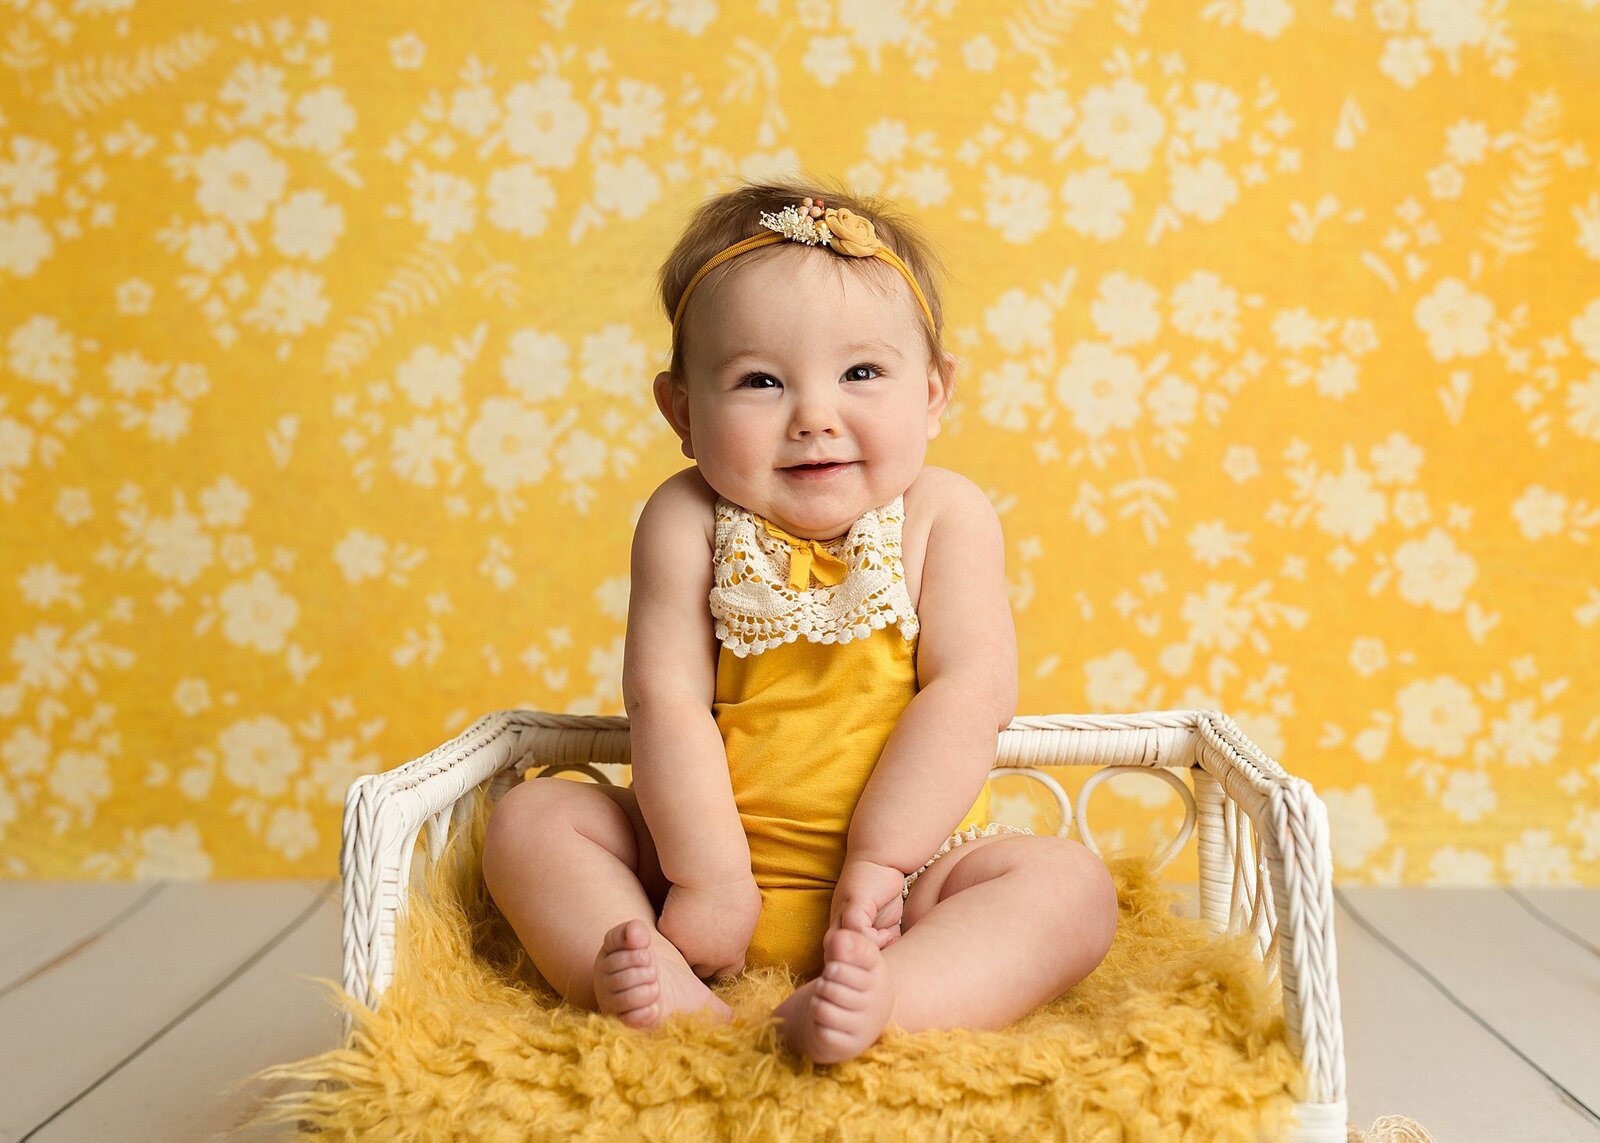 hotographers in the quad cities, Baby  photographer near me,  baby pictures quad city, 9 month pictures quad cities, baby photos near me, baby photography bettendorf, baby pictures muscatine, quad city photographers